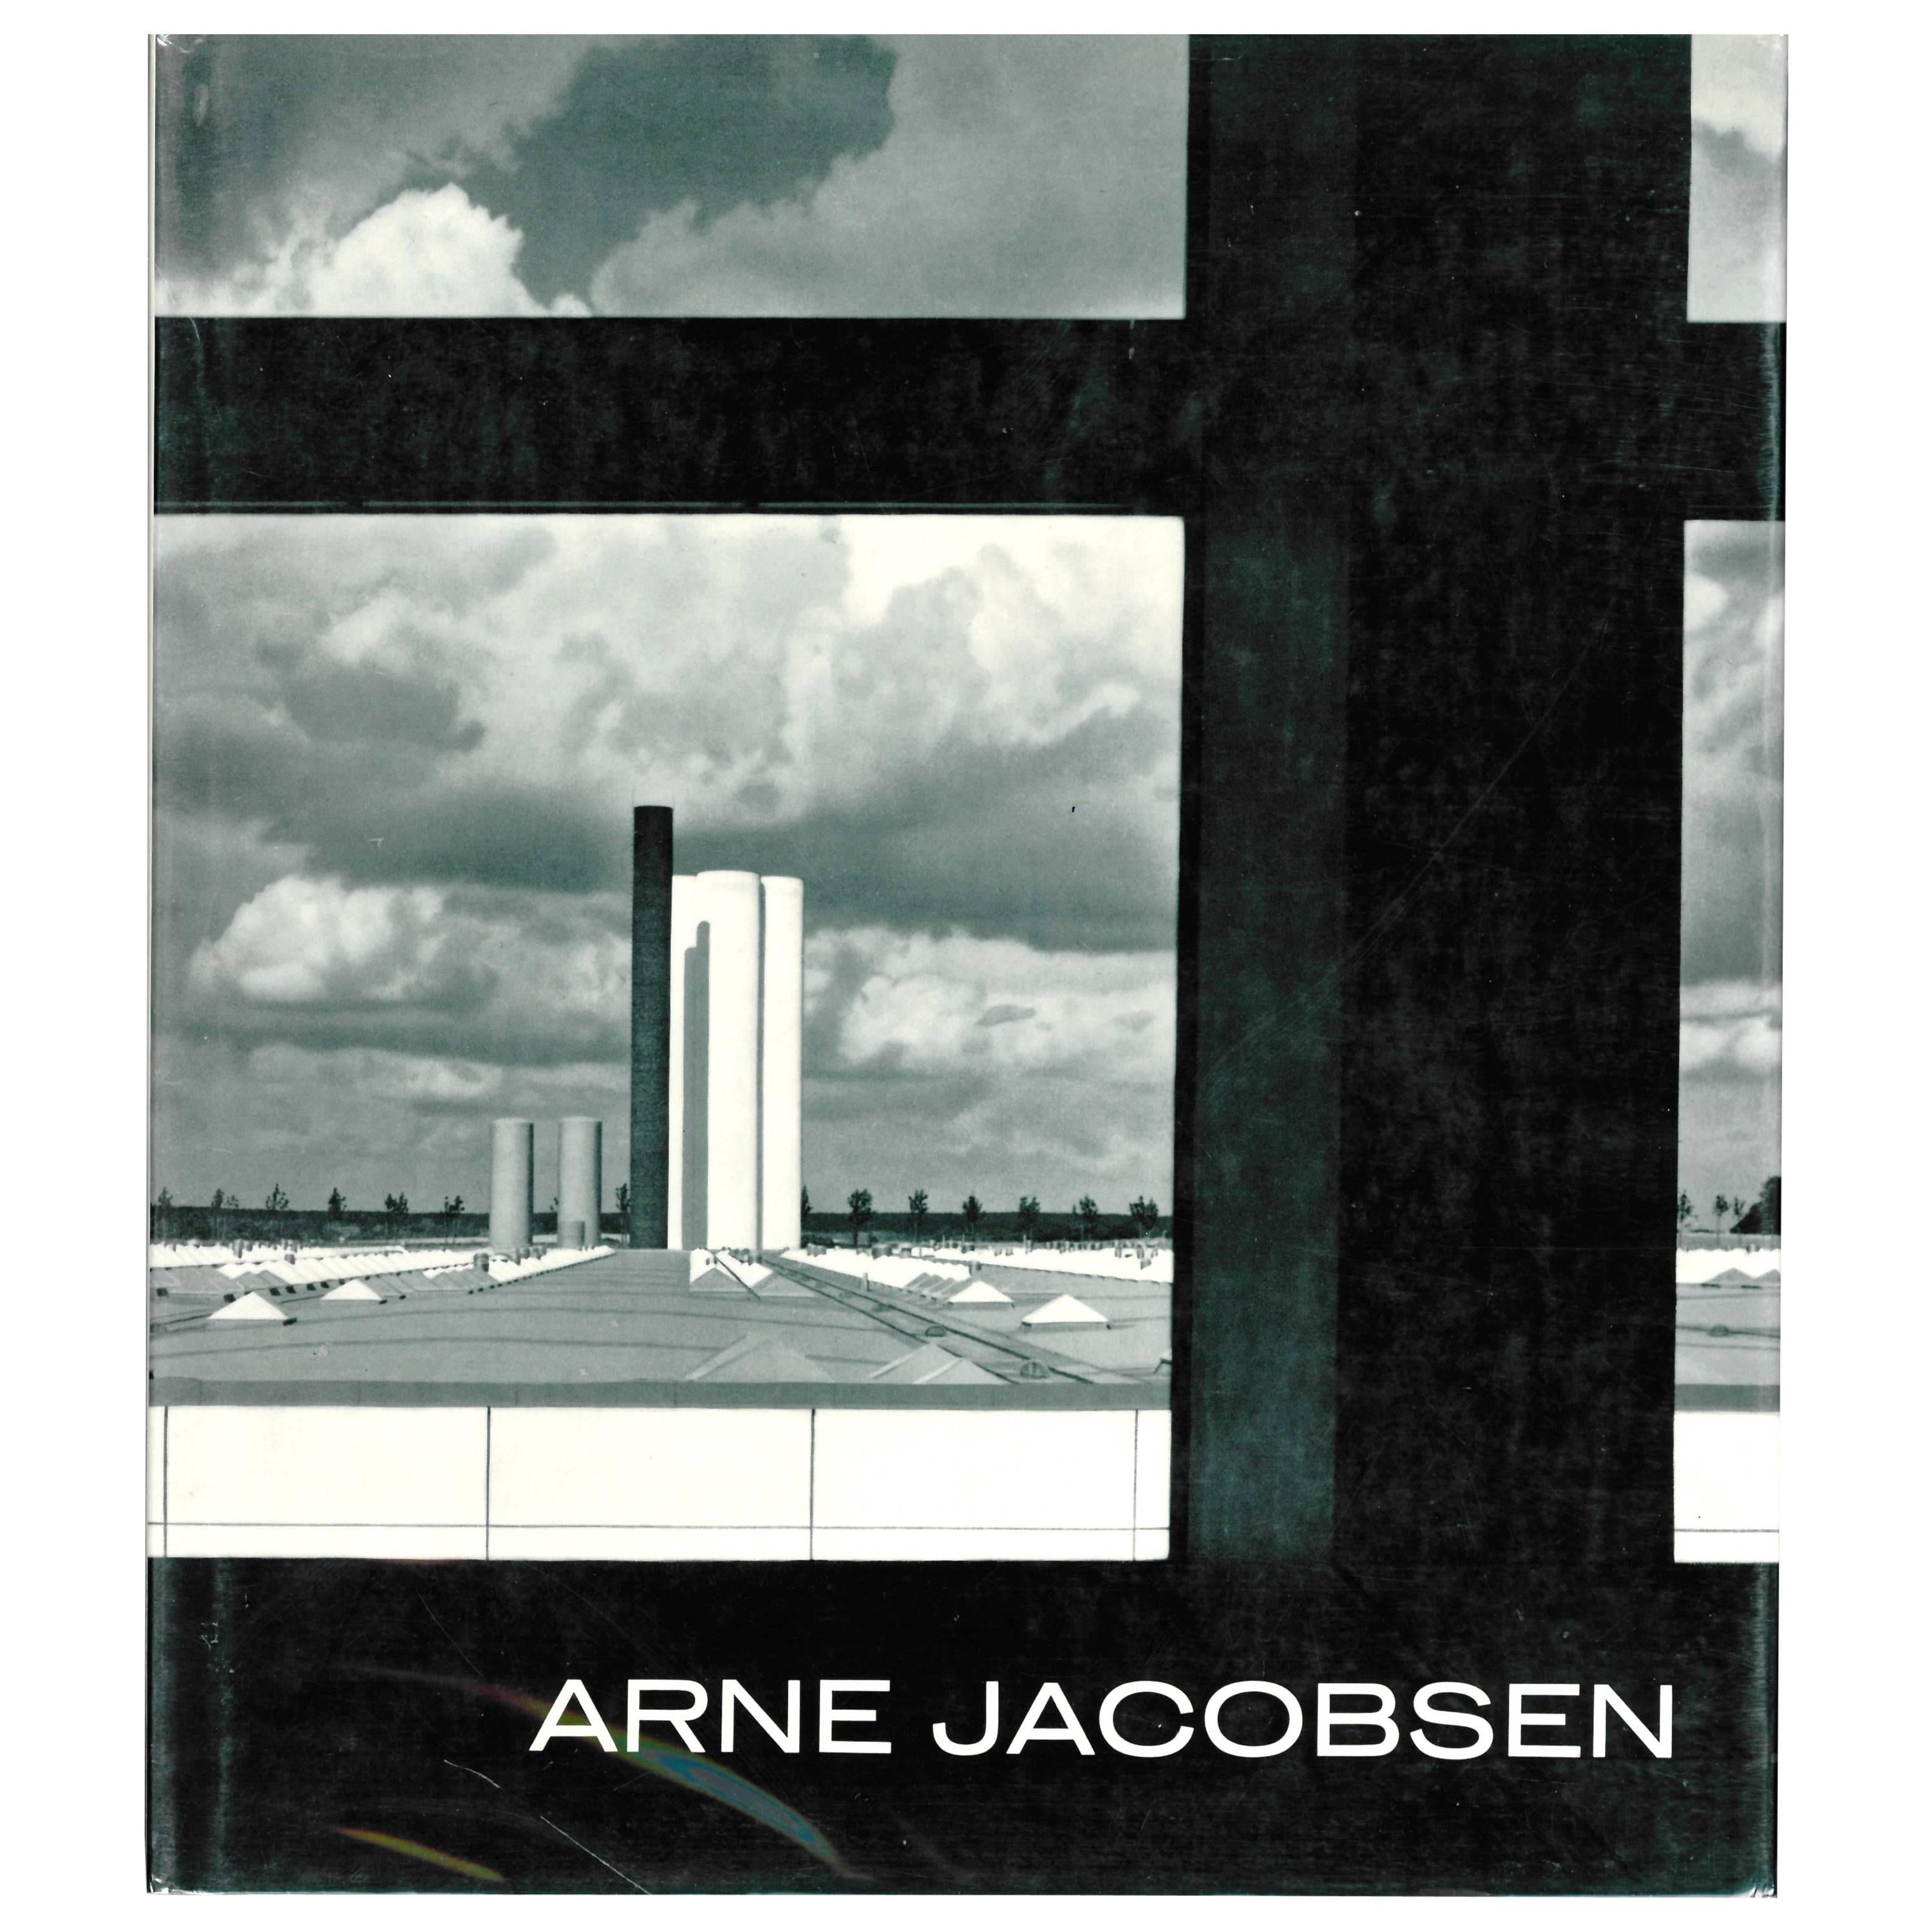 Arne Jacobsen by Tobias Faber (Book)